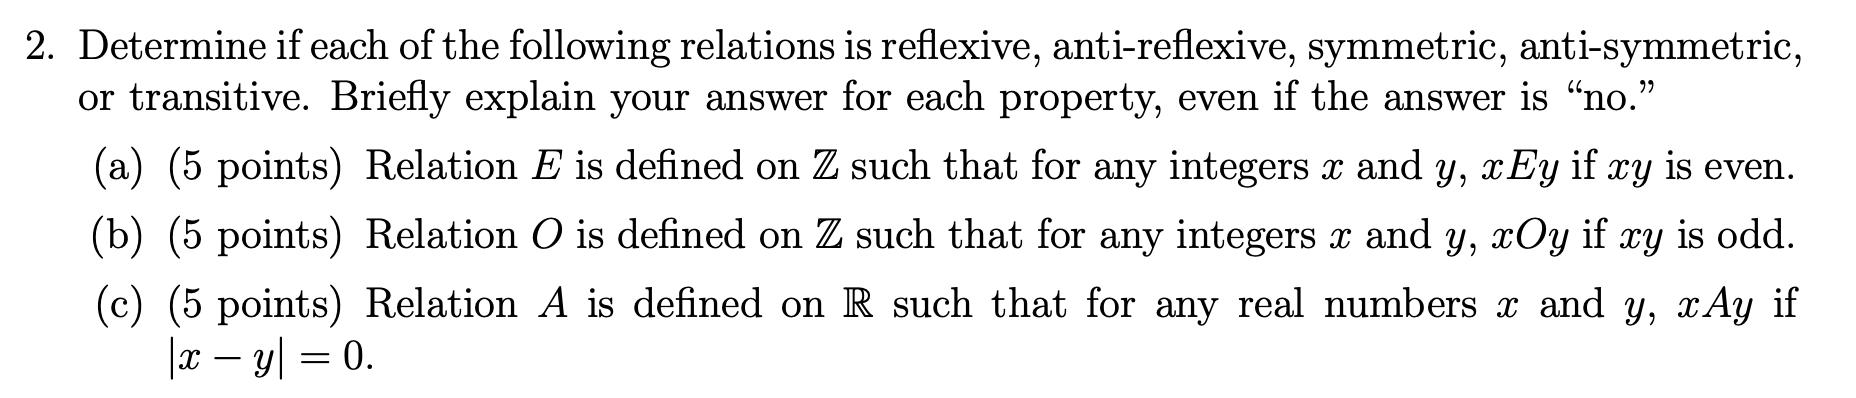 2. Determine if each of the following relations is reflexive, anti-reflexive, symmetric, anti-symmetric, or